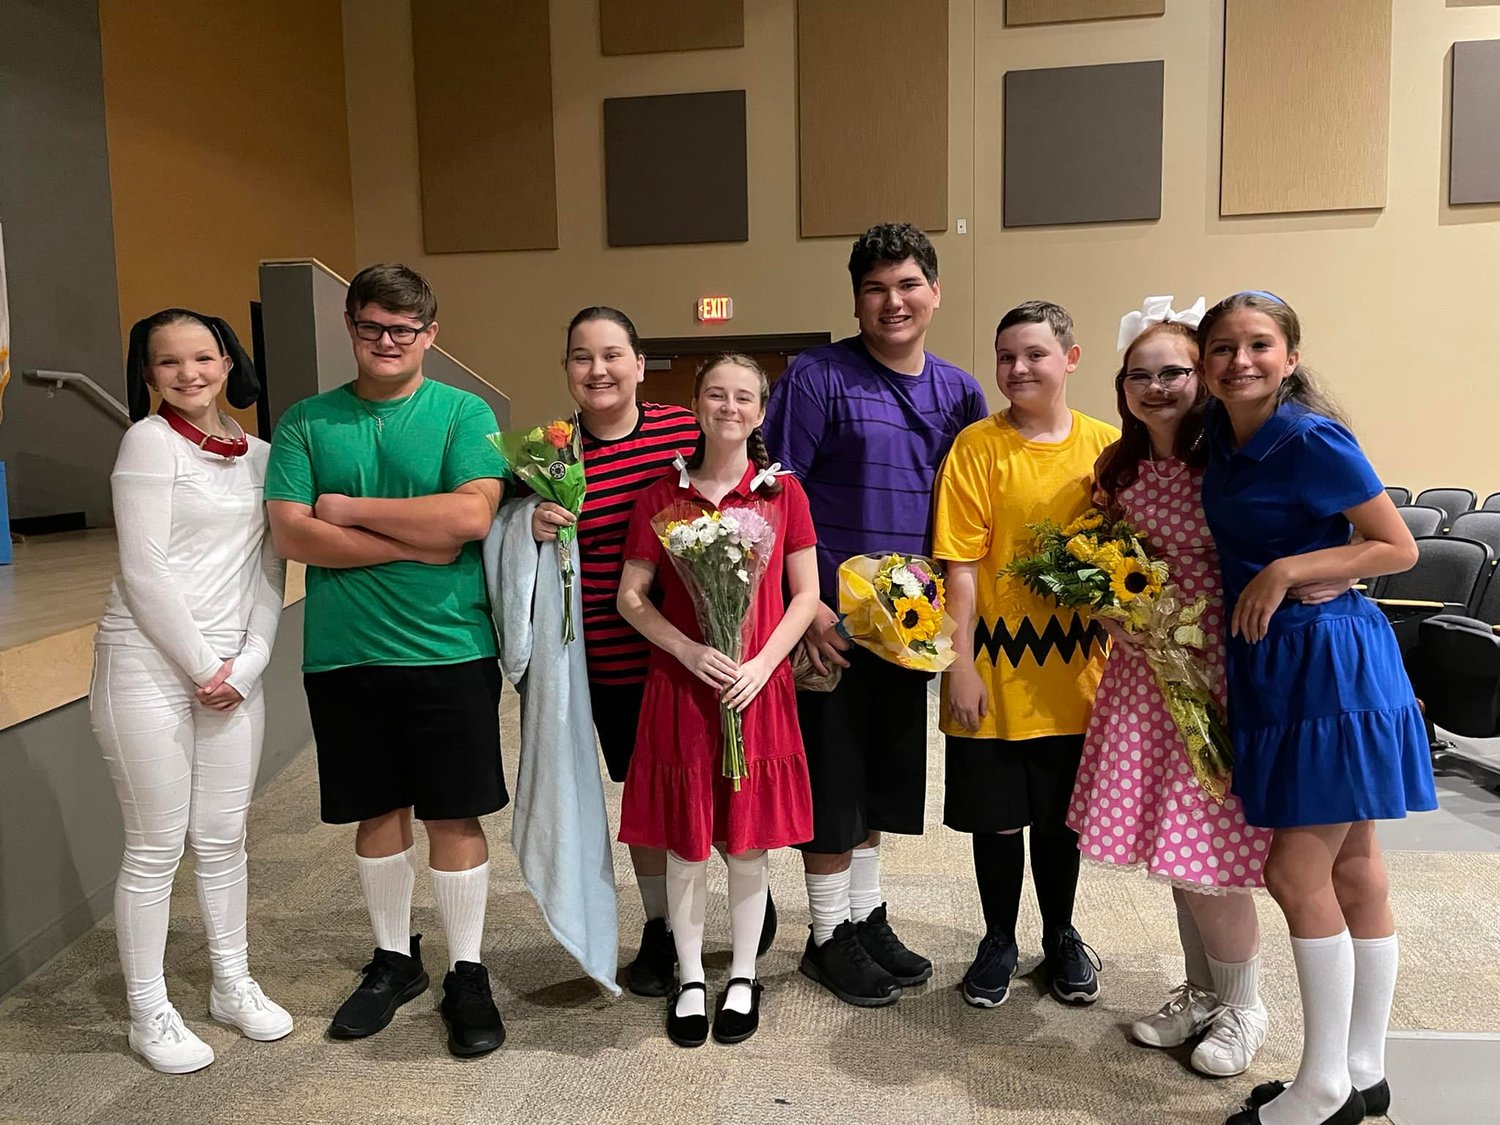 MOORE HAVEN – Moore Haven Middle High School presented "You're a Good Man, Charlie Brown," as their Spring musical. [Photo courtesy MHMHS]